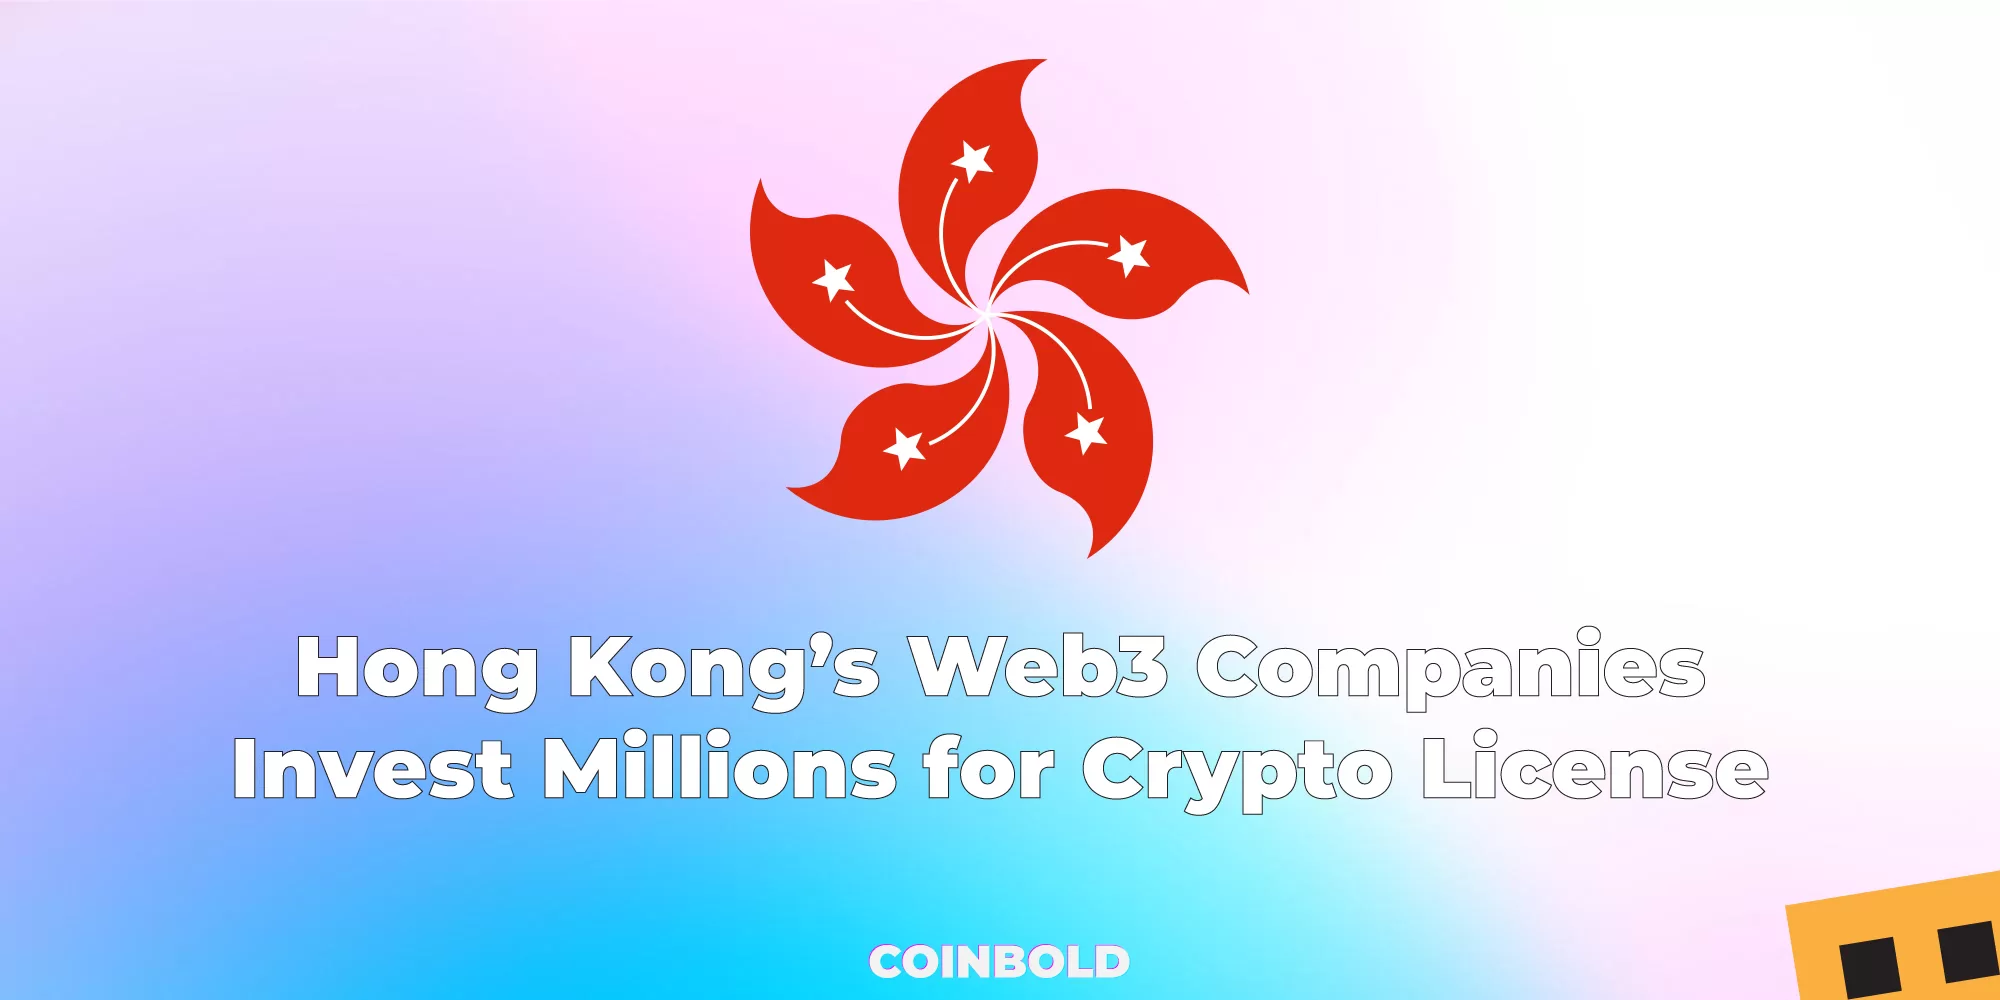 Hong Kong’s Web3 Companies Invest Millions for Crypto License